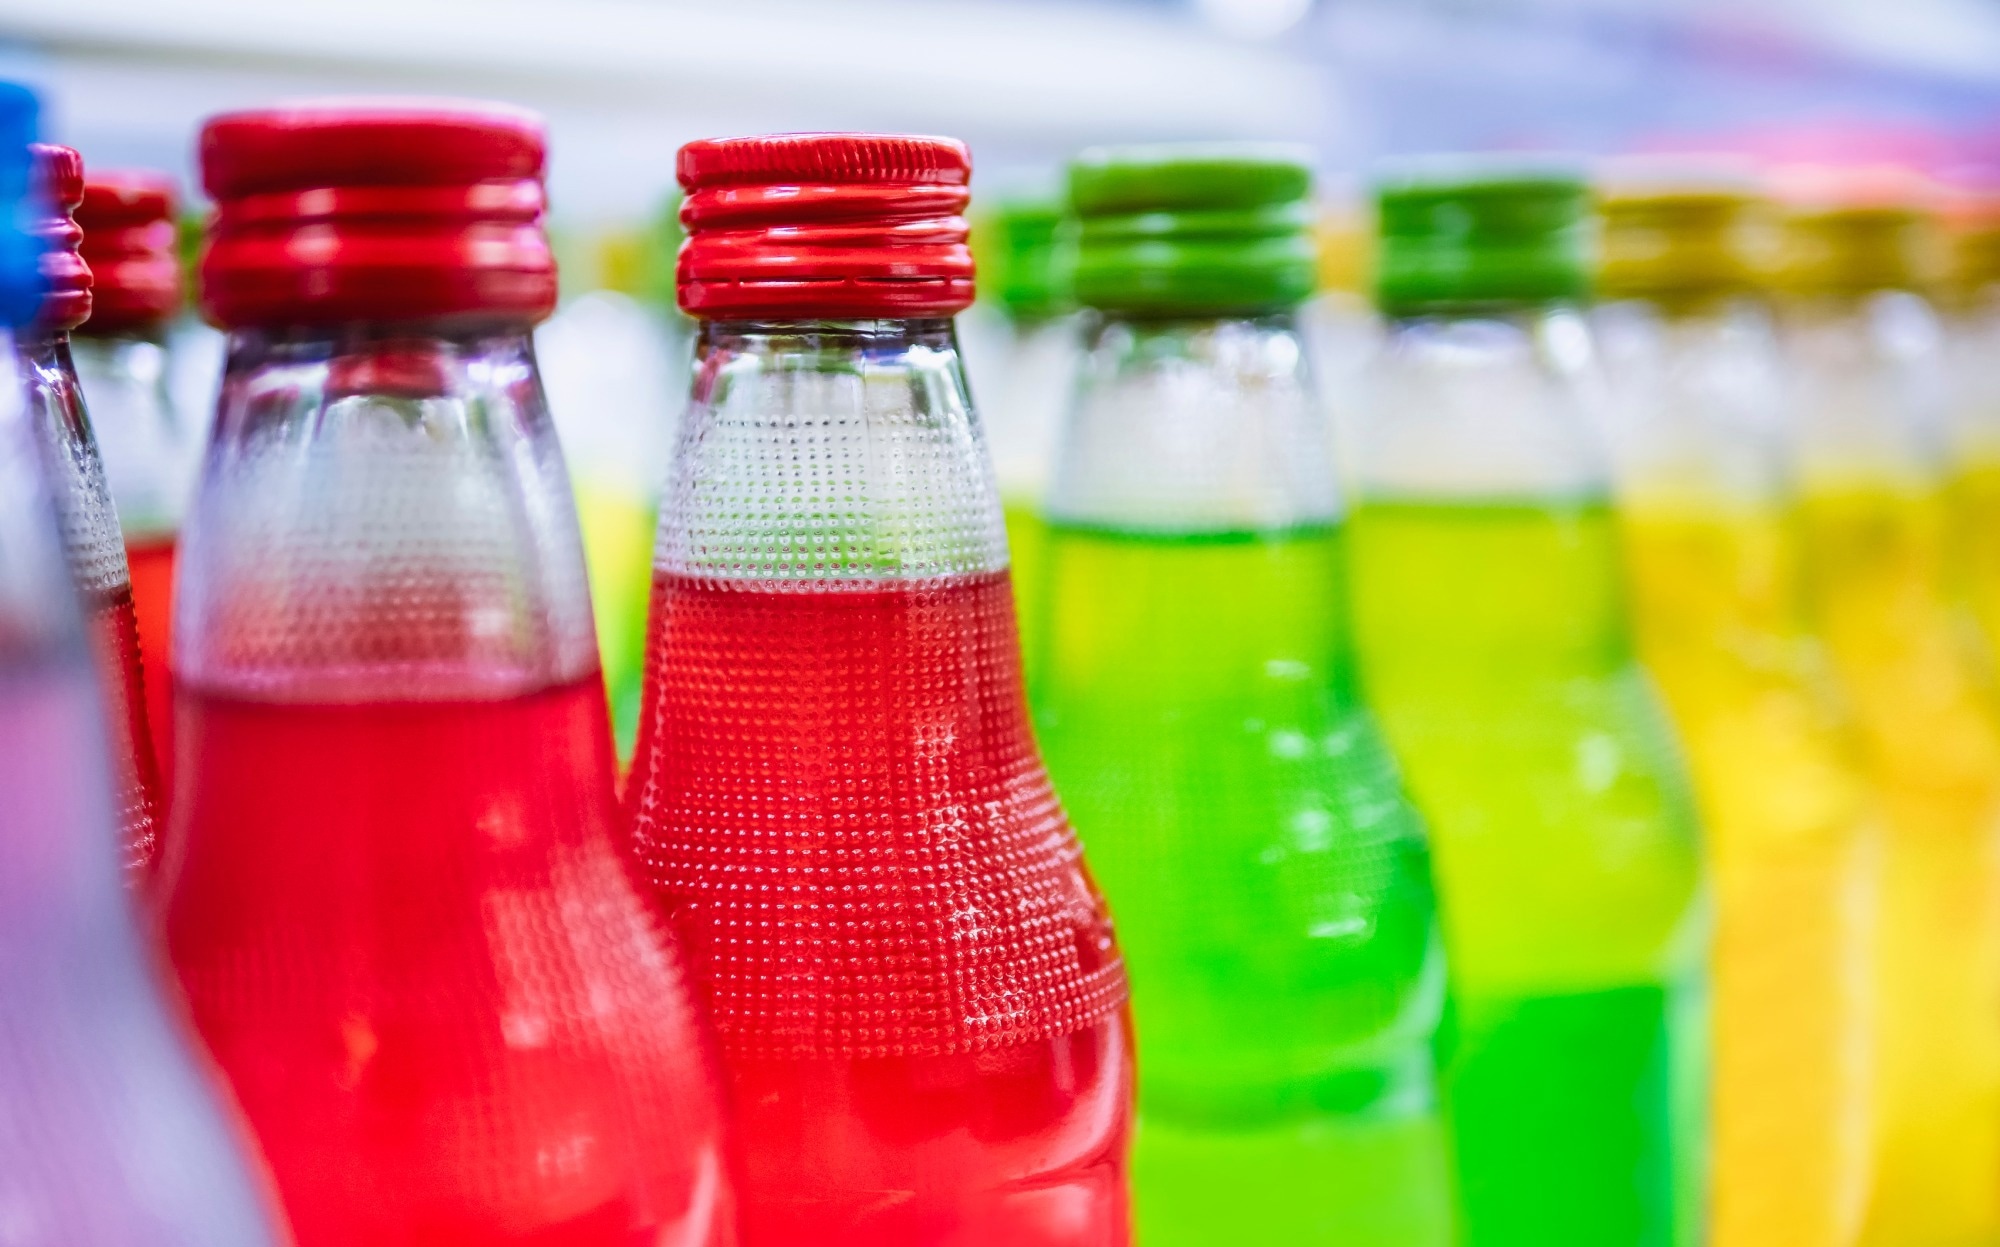 Study challenges health benefits of artificially sweetened beverages, links to increased health risks 6555f4997d531.jpeg